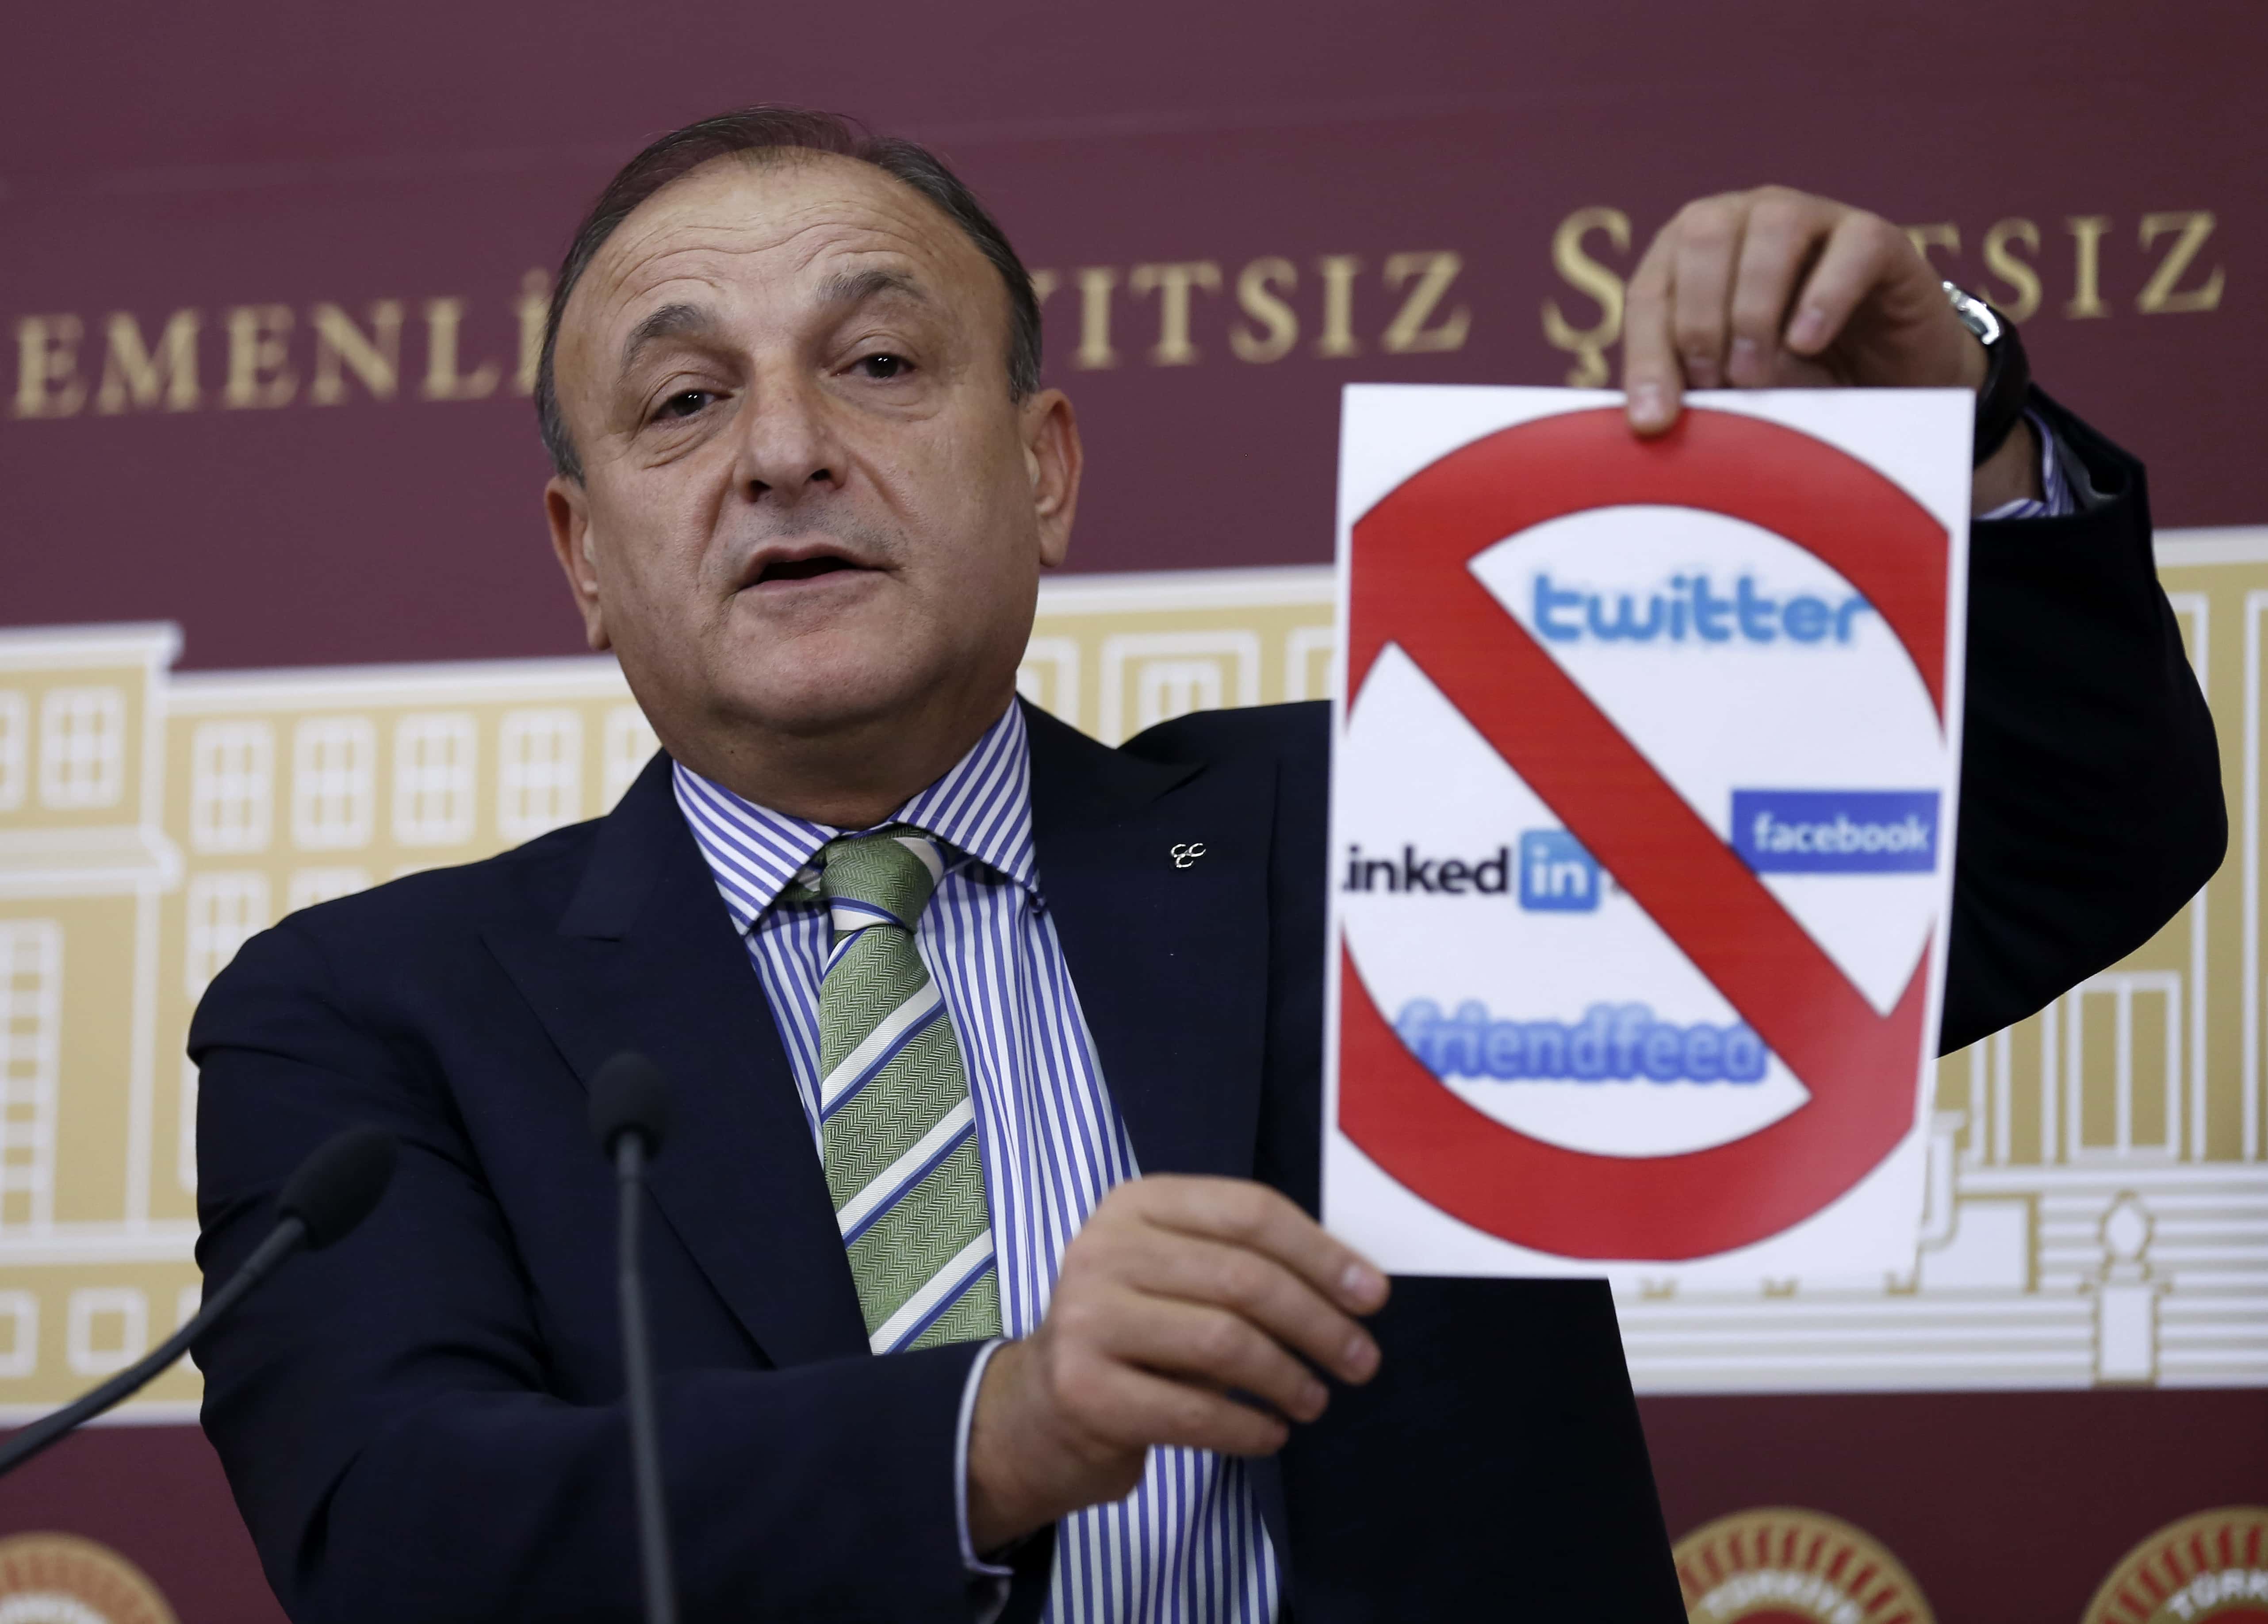 Oktay Vural, a leading deputy from the opposition Nationalist Action Party, MHP, holds up a placard during a parliamentary debate shortly before Turkey's Parliament approved legislation that would tighten government controls over the Internet., AP Photo